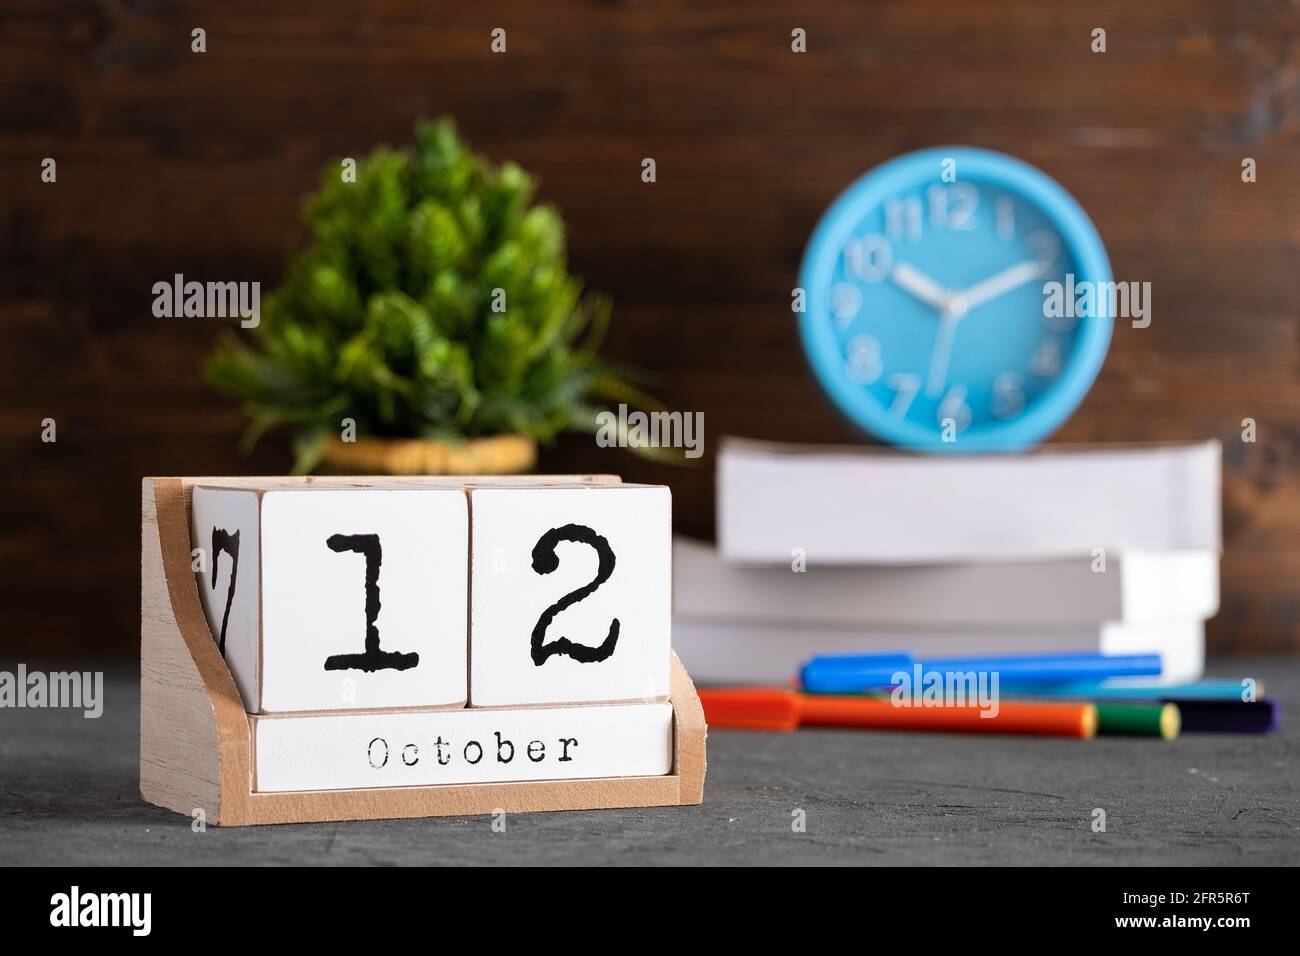 October 12th. October 12 wooden cube calendar with blur objects on background. Stock Photo